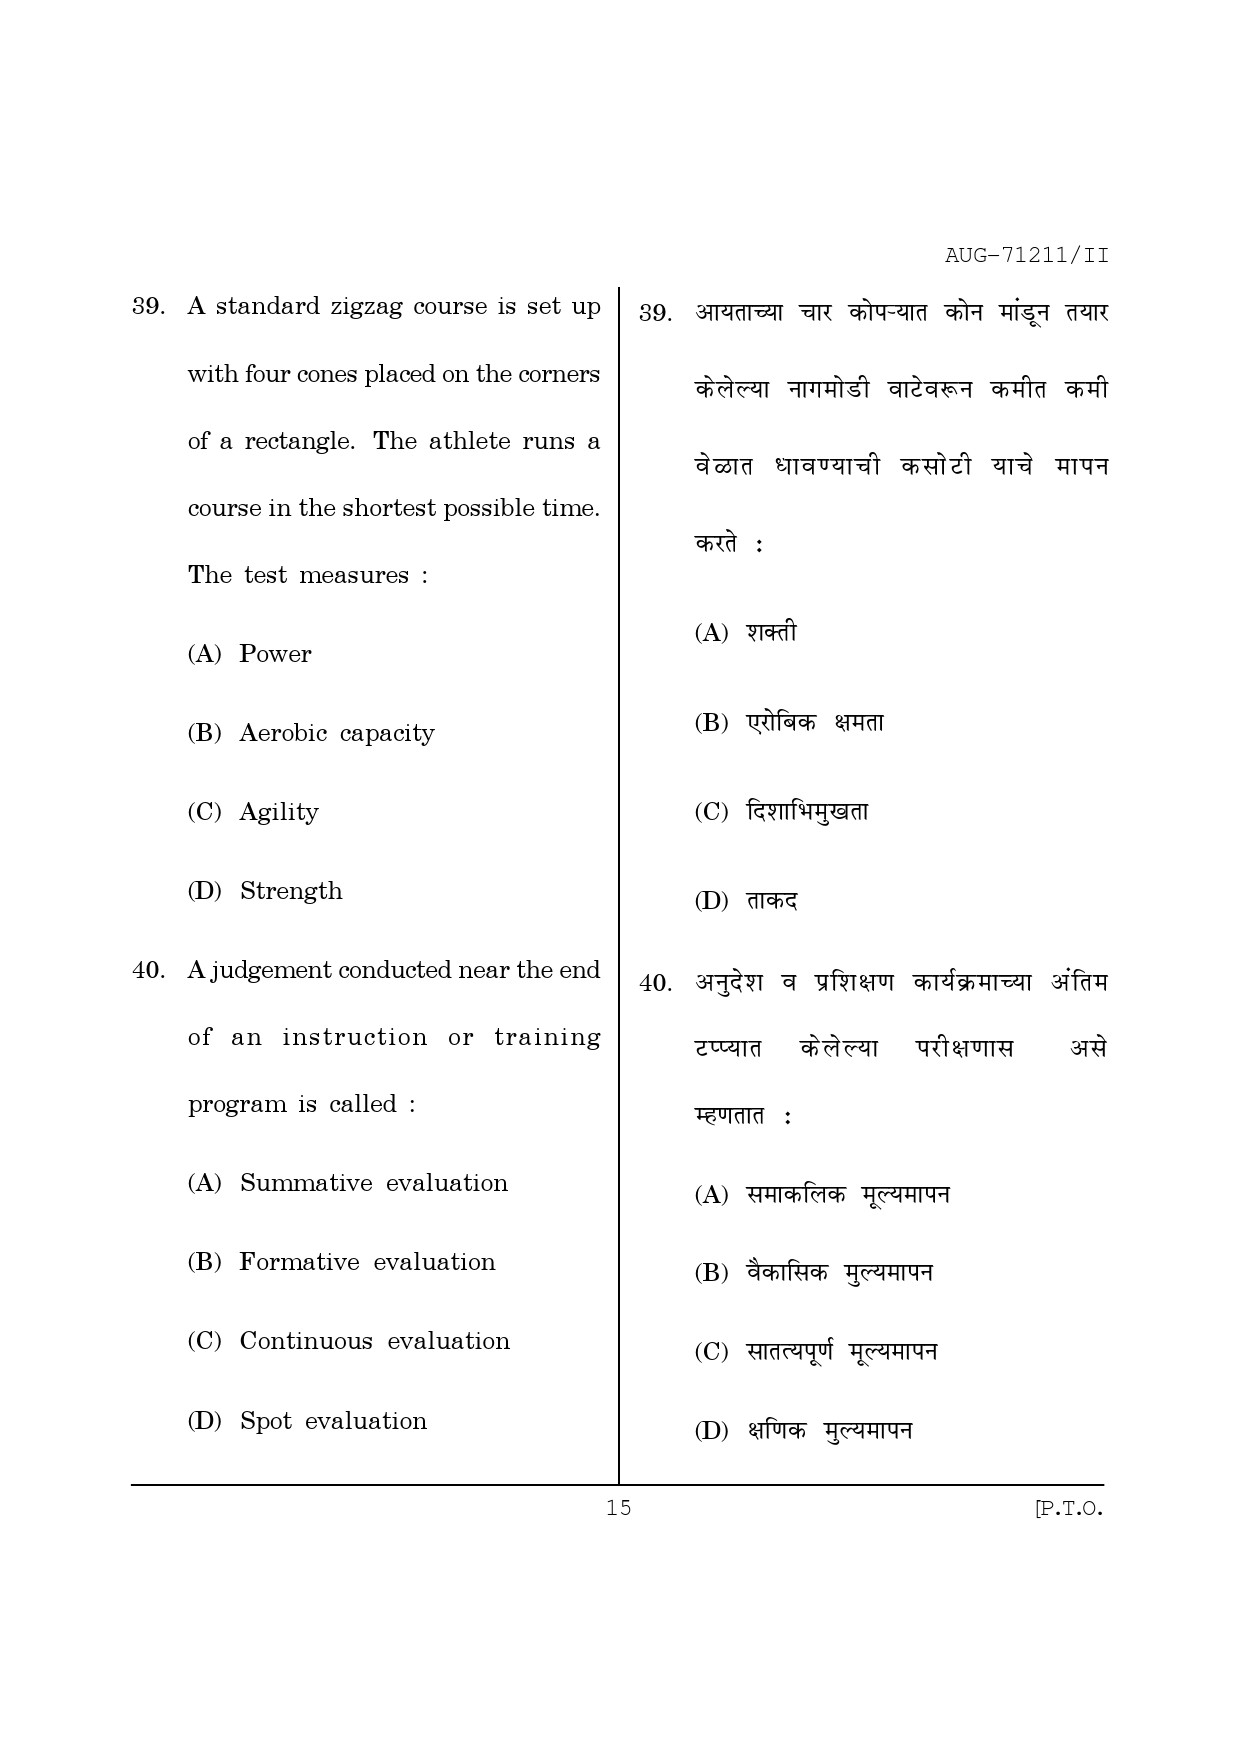 Maharashtra SET Physical Education Question Paper II August 2011 15